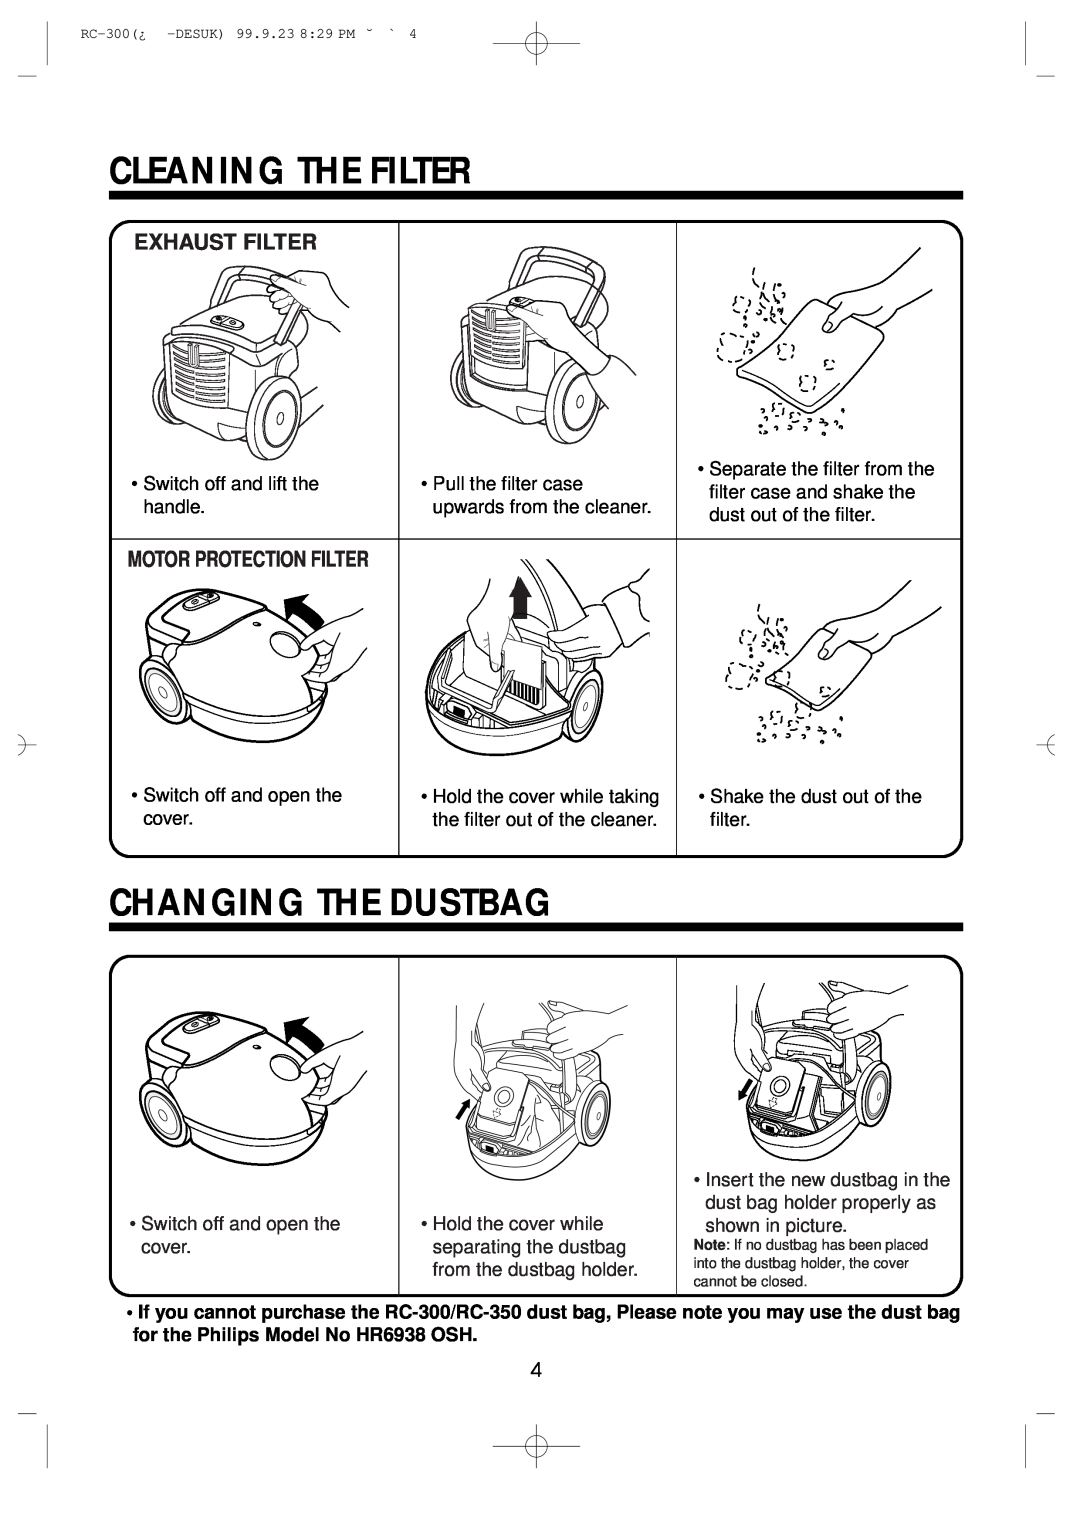 Daewoo RC-300 specifications Cleaning The Filter, Changing The Dustbag, Exhaust Filter, Motor Protection Filter 